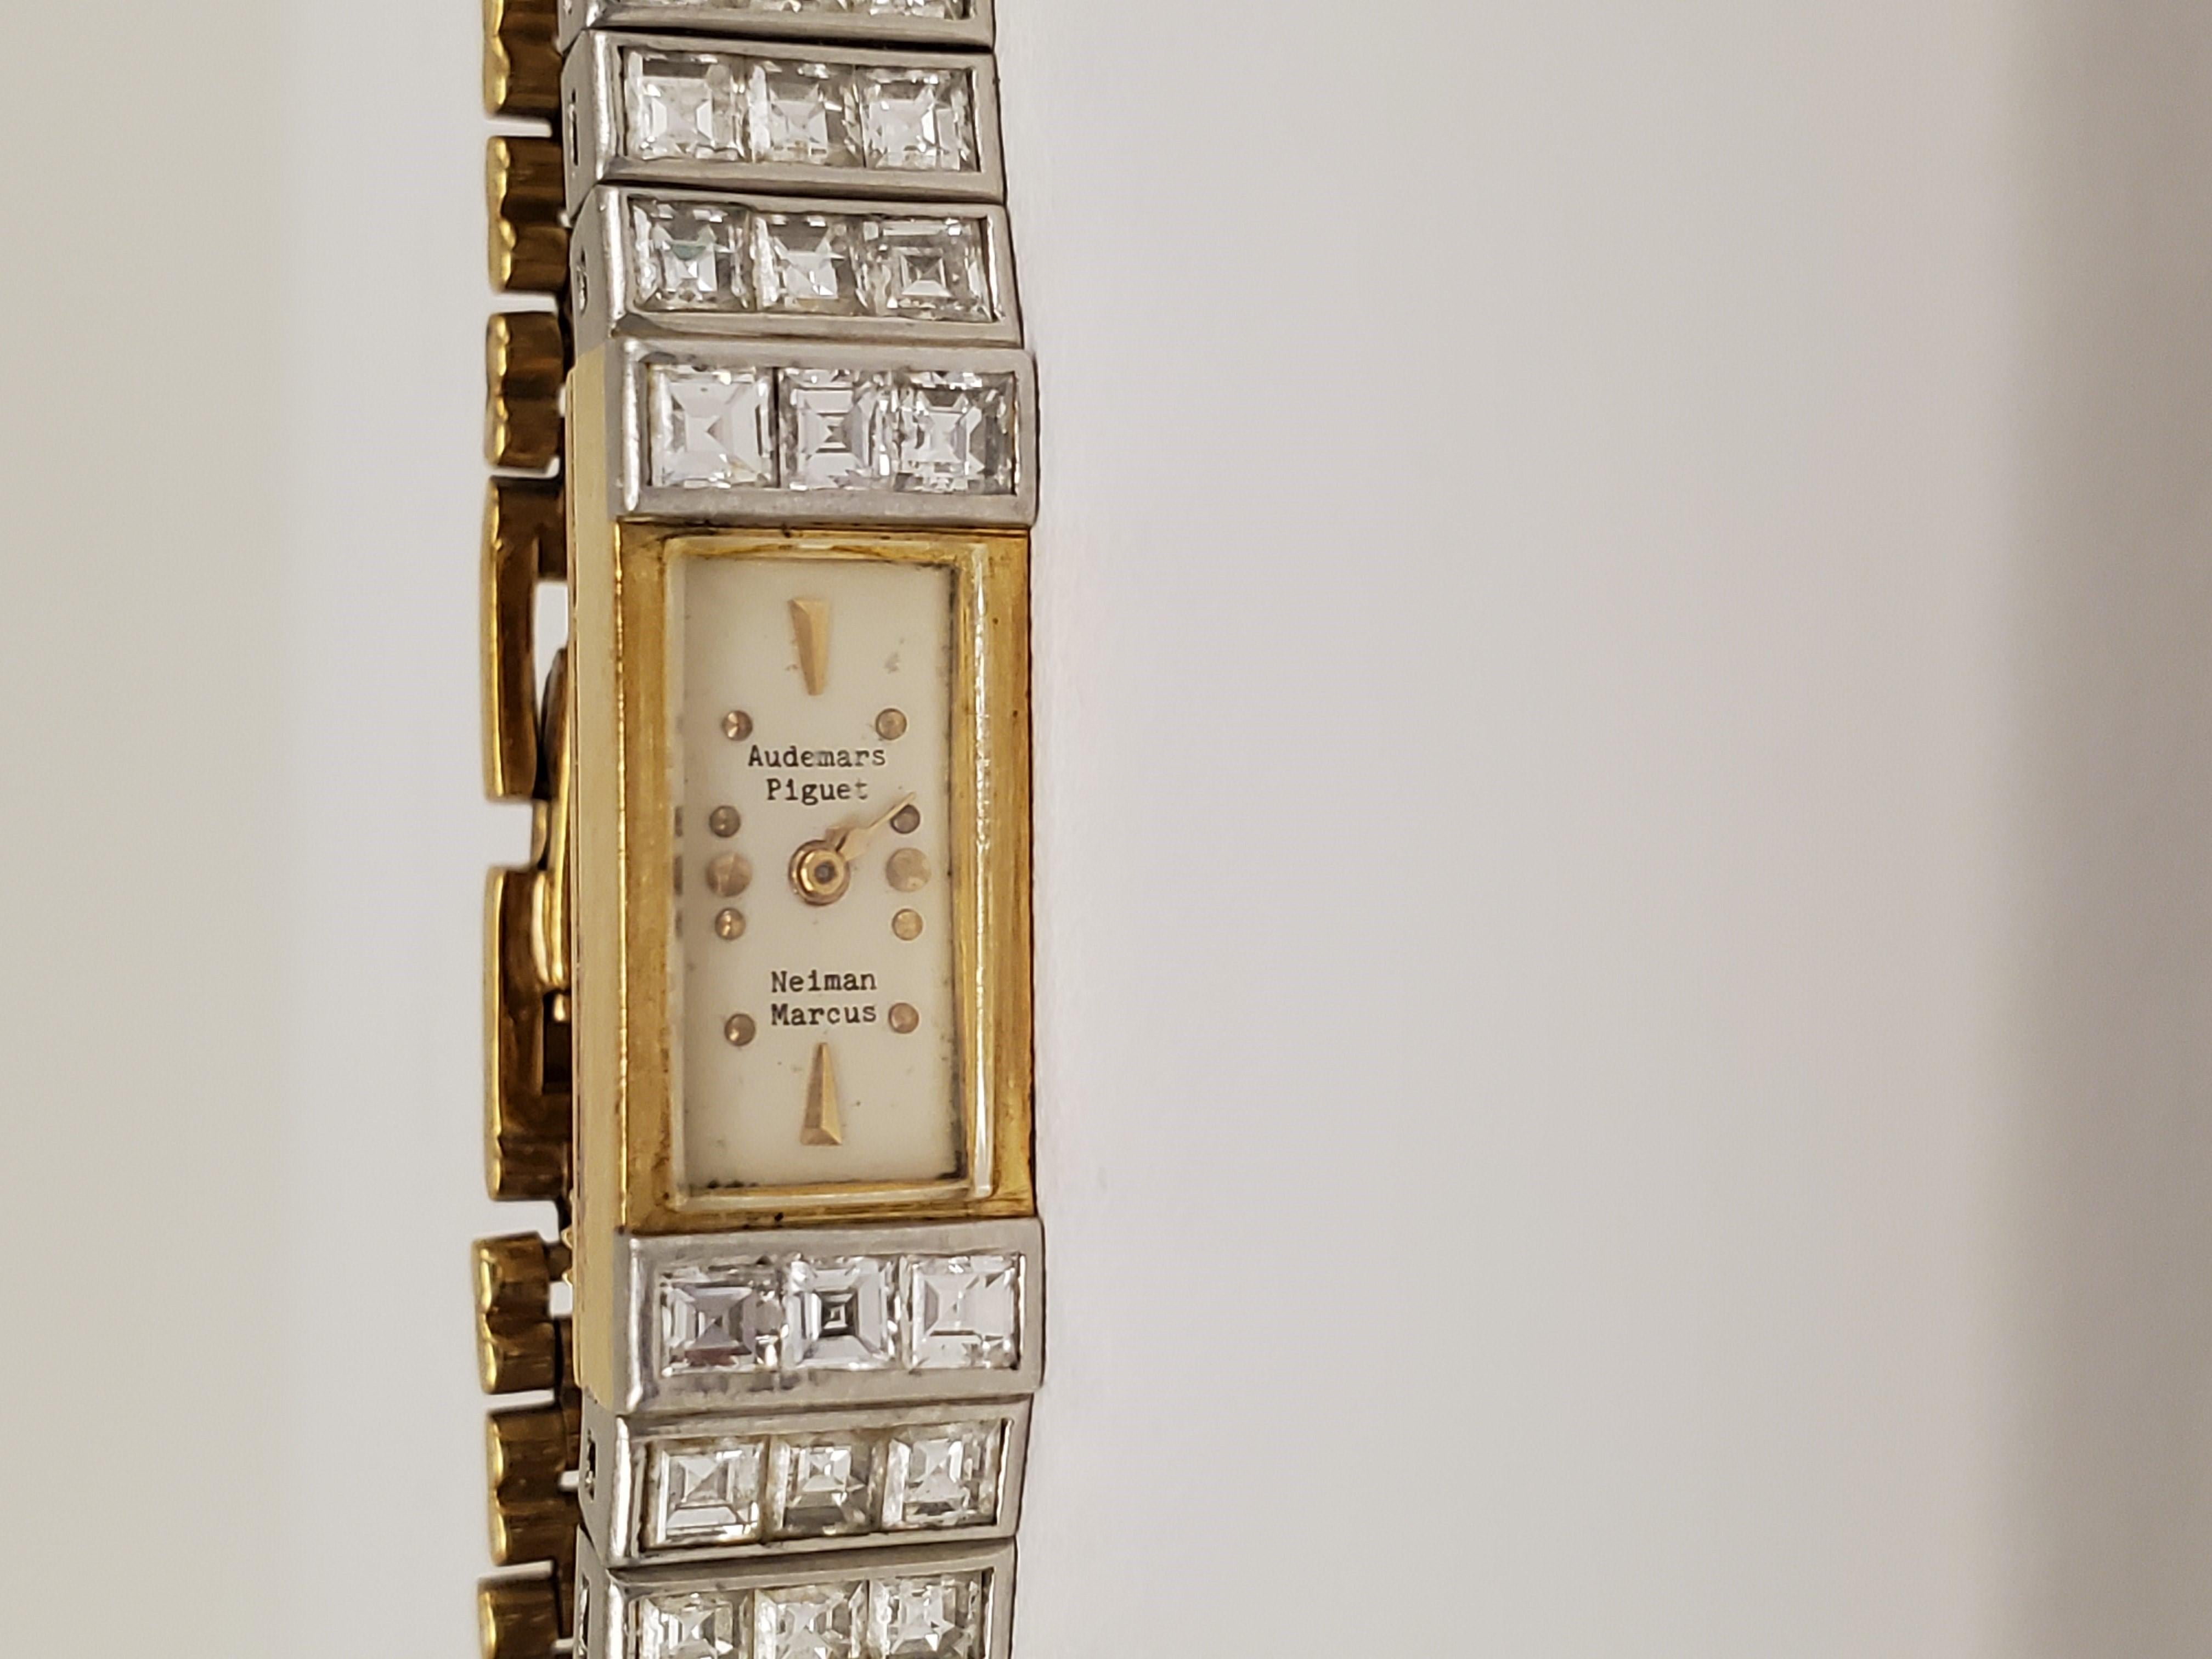 Elegant vintage Audemars Piguet watch crafted in 18 carat yellow gold and platinum. The watch is set with approximately 1.80 carats of square emerald cut diamonds (G-H color, VS clarity). The dial is signed Audemars Piguet. Retailed by Neiman